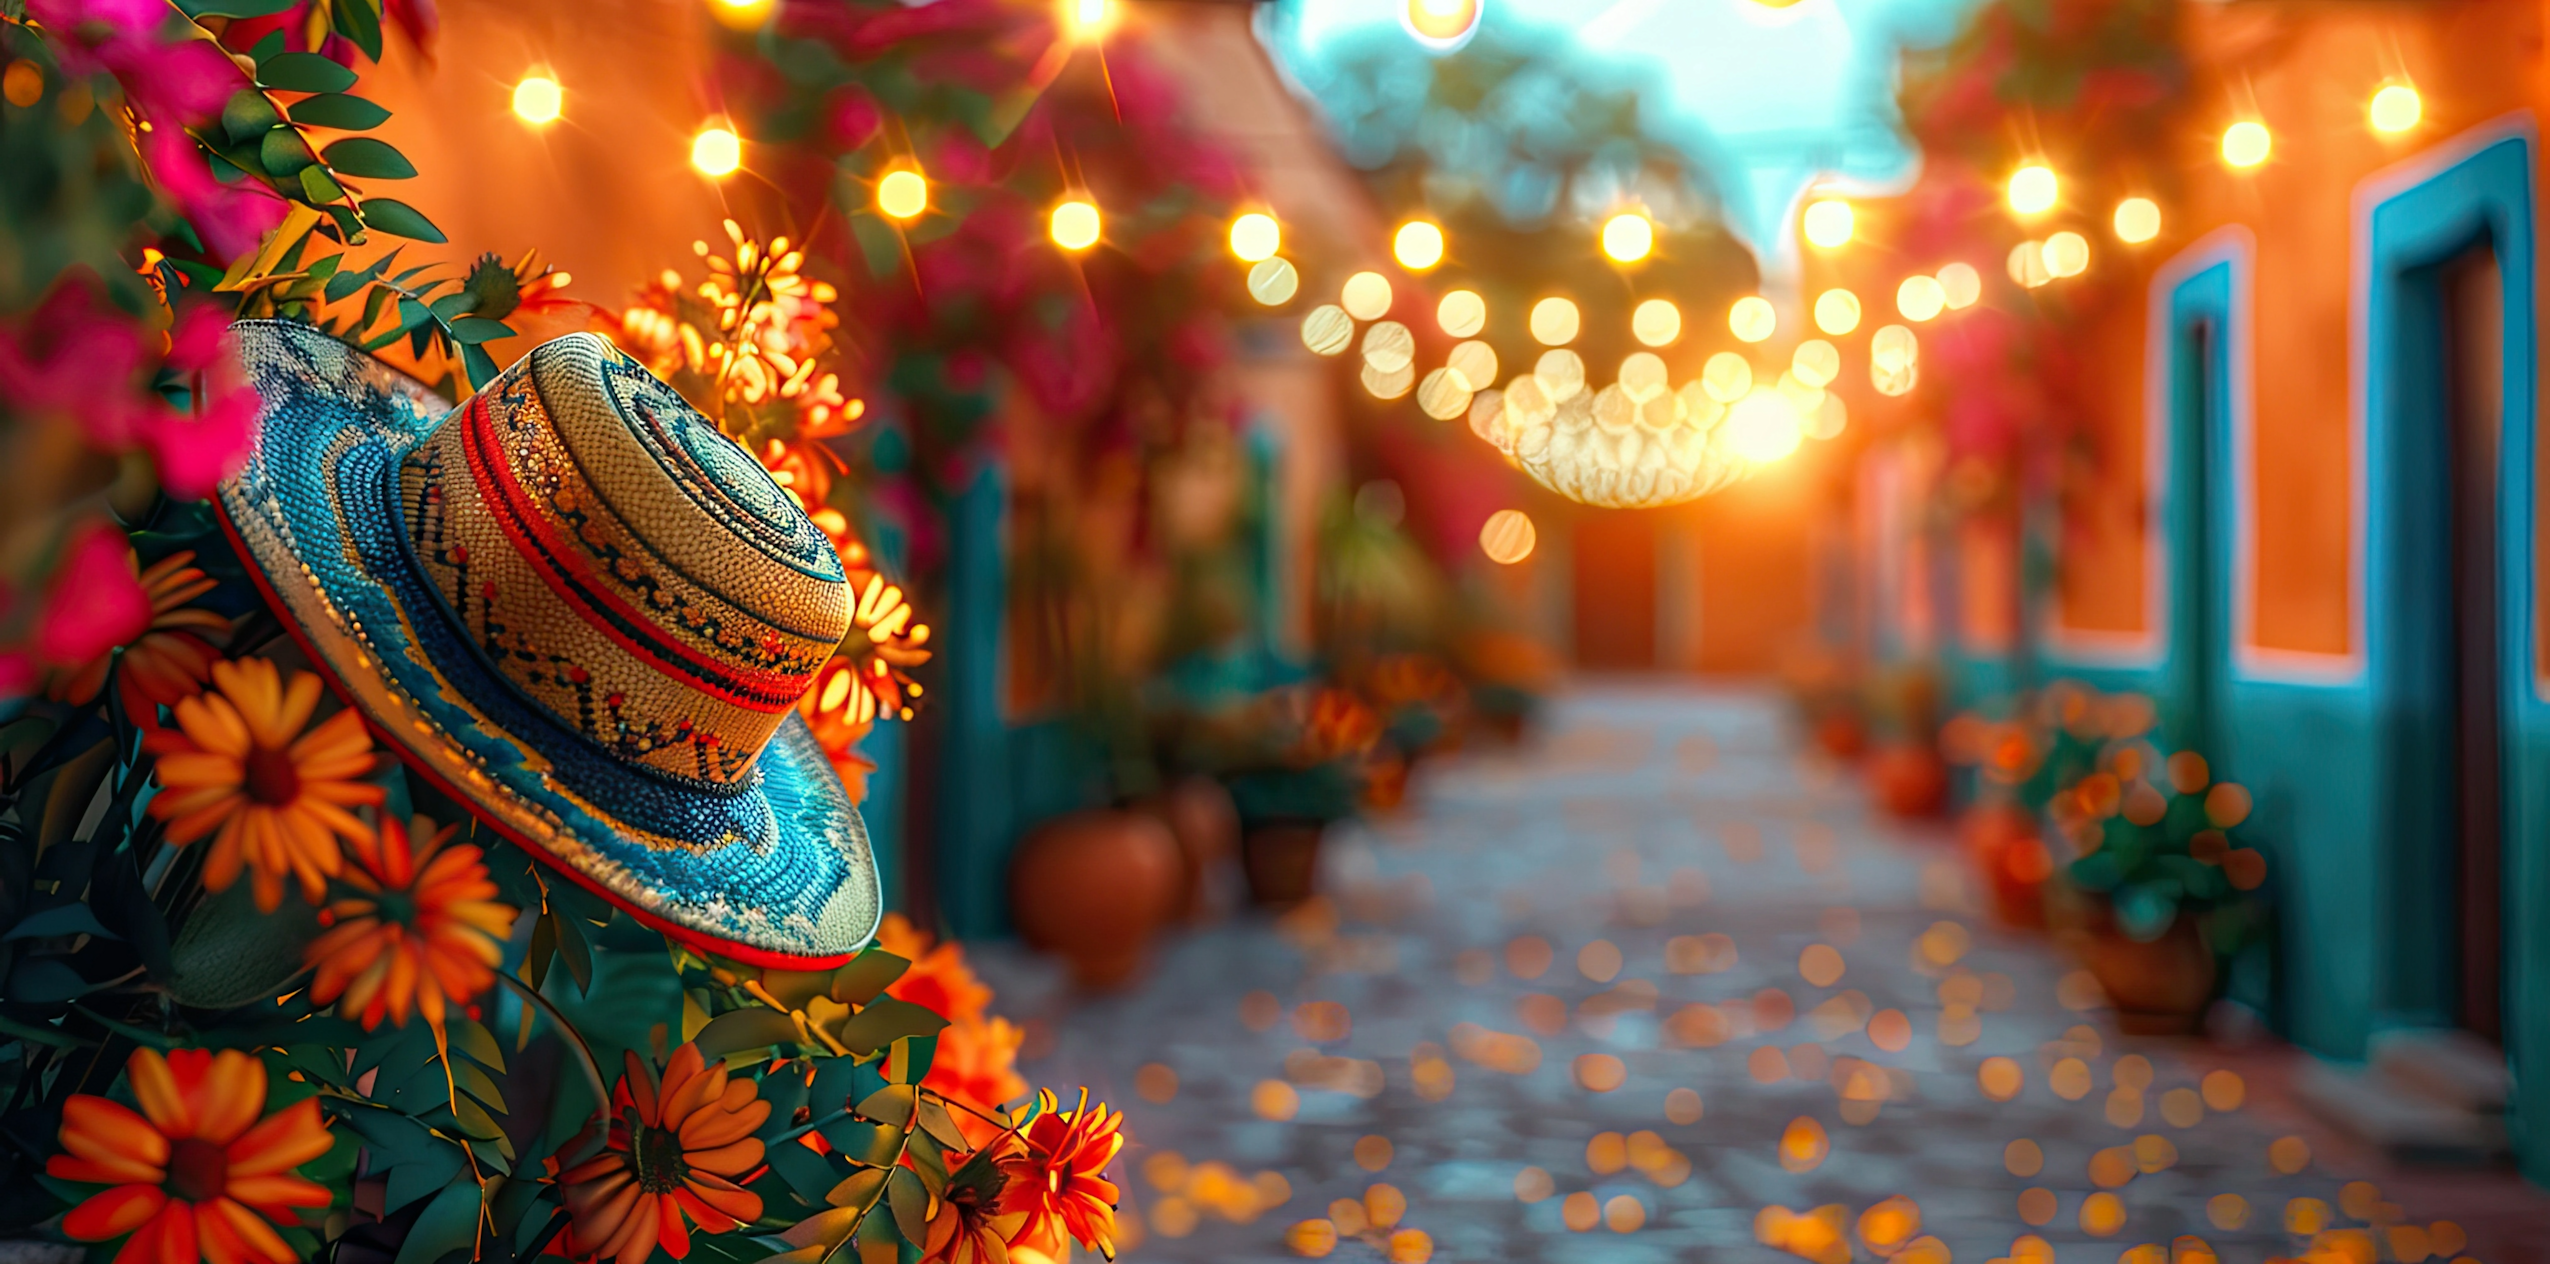 Walkway through colorful buildings with a mexican hat in the forefront